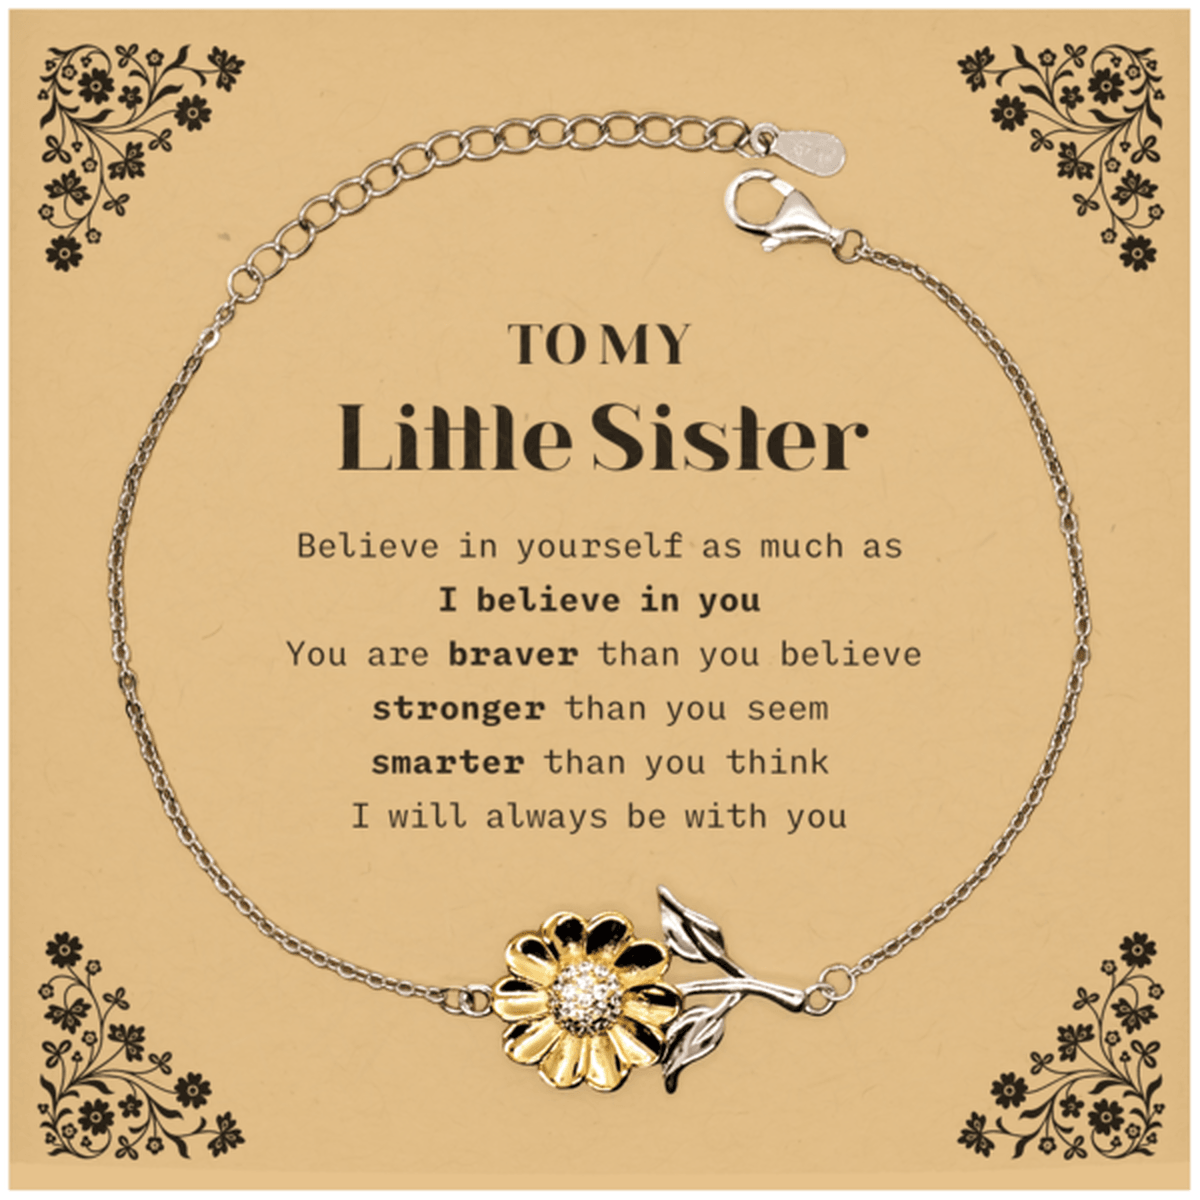 Little Sister Sunflower Bracelet Gifts, To My Little Sister You are braver than you believe, stronger than you seem, Inspirational Gifts For Little Sister Card, Birthday, Christmas Gifts For Little Sister Men Women